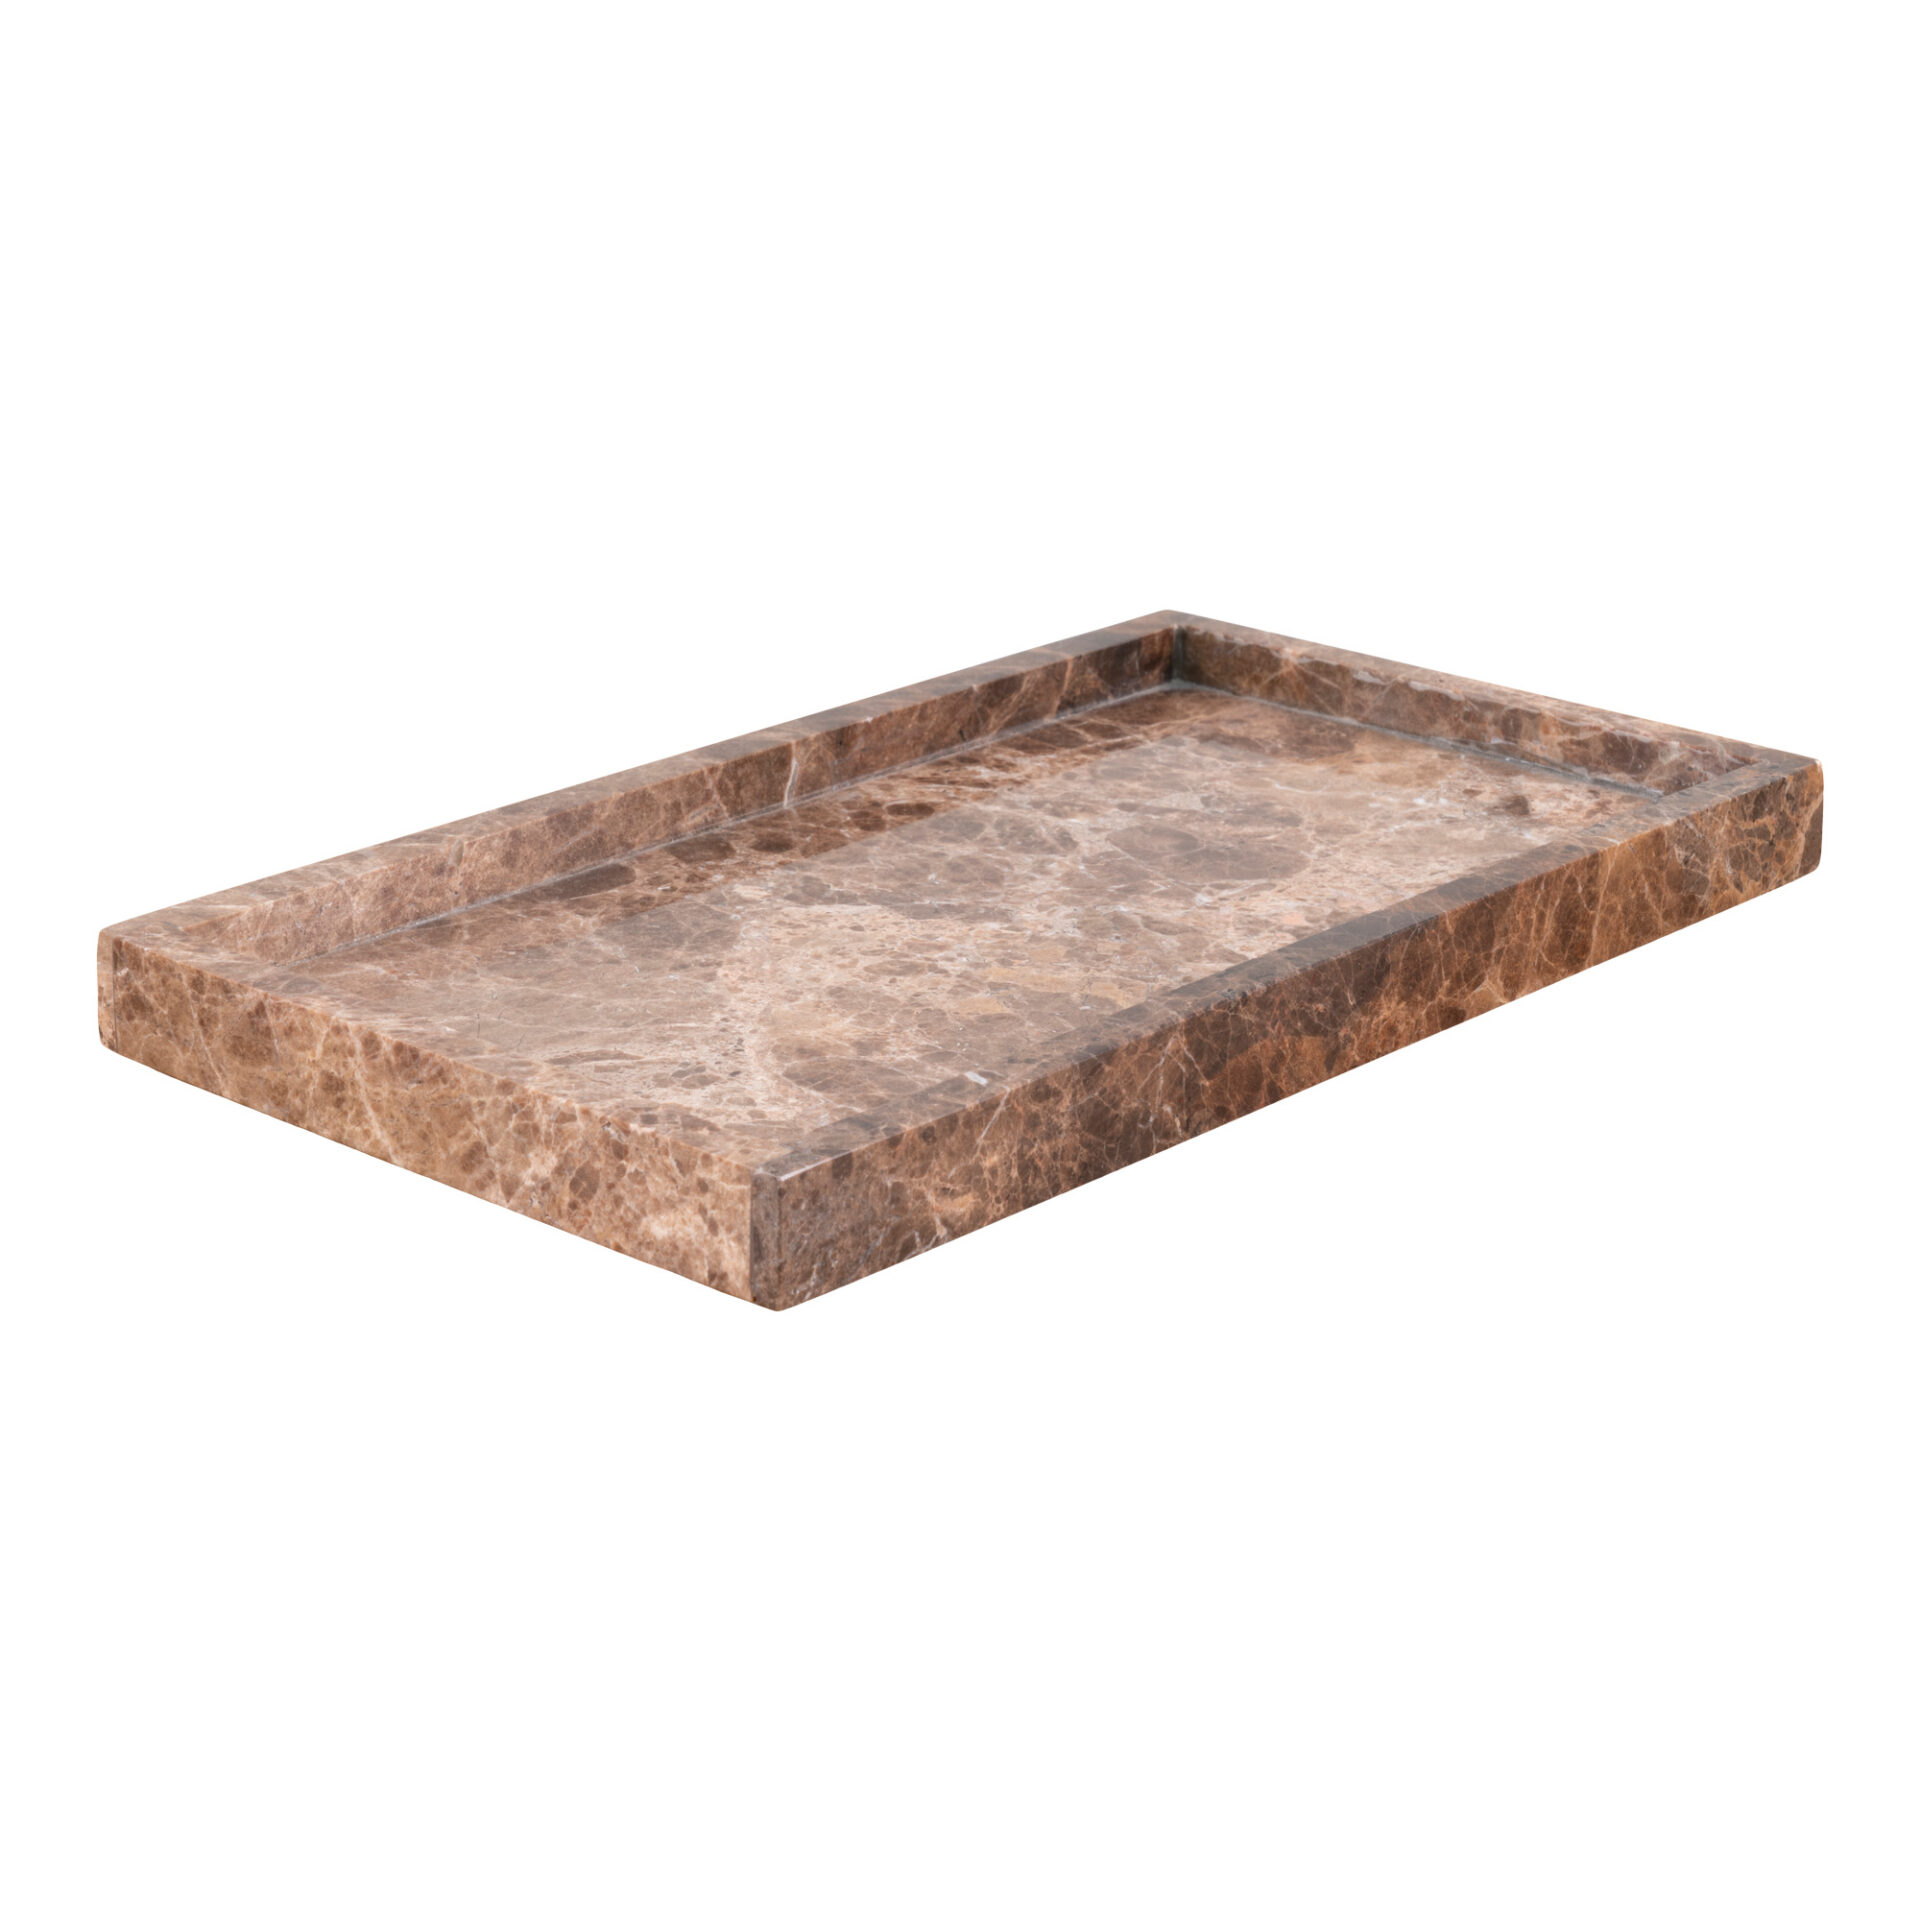 Marble tray 27x15 cm – brown